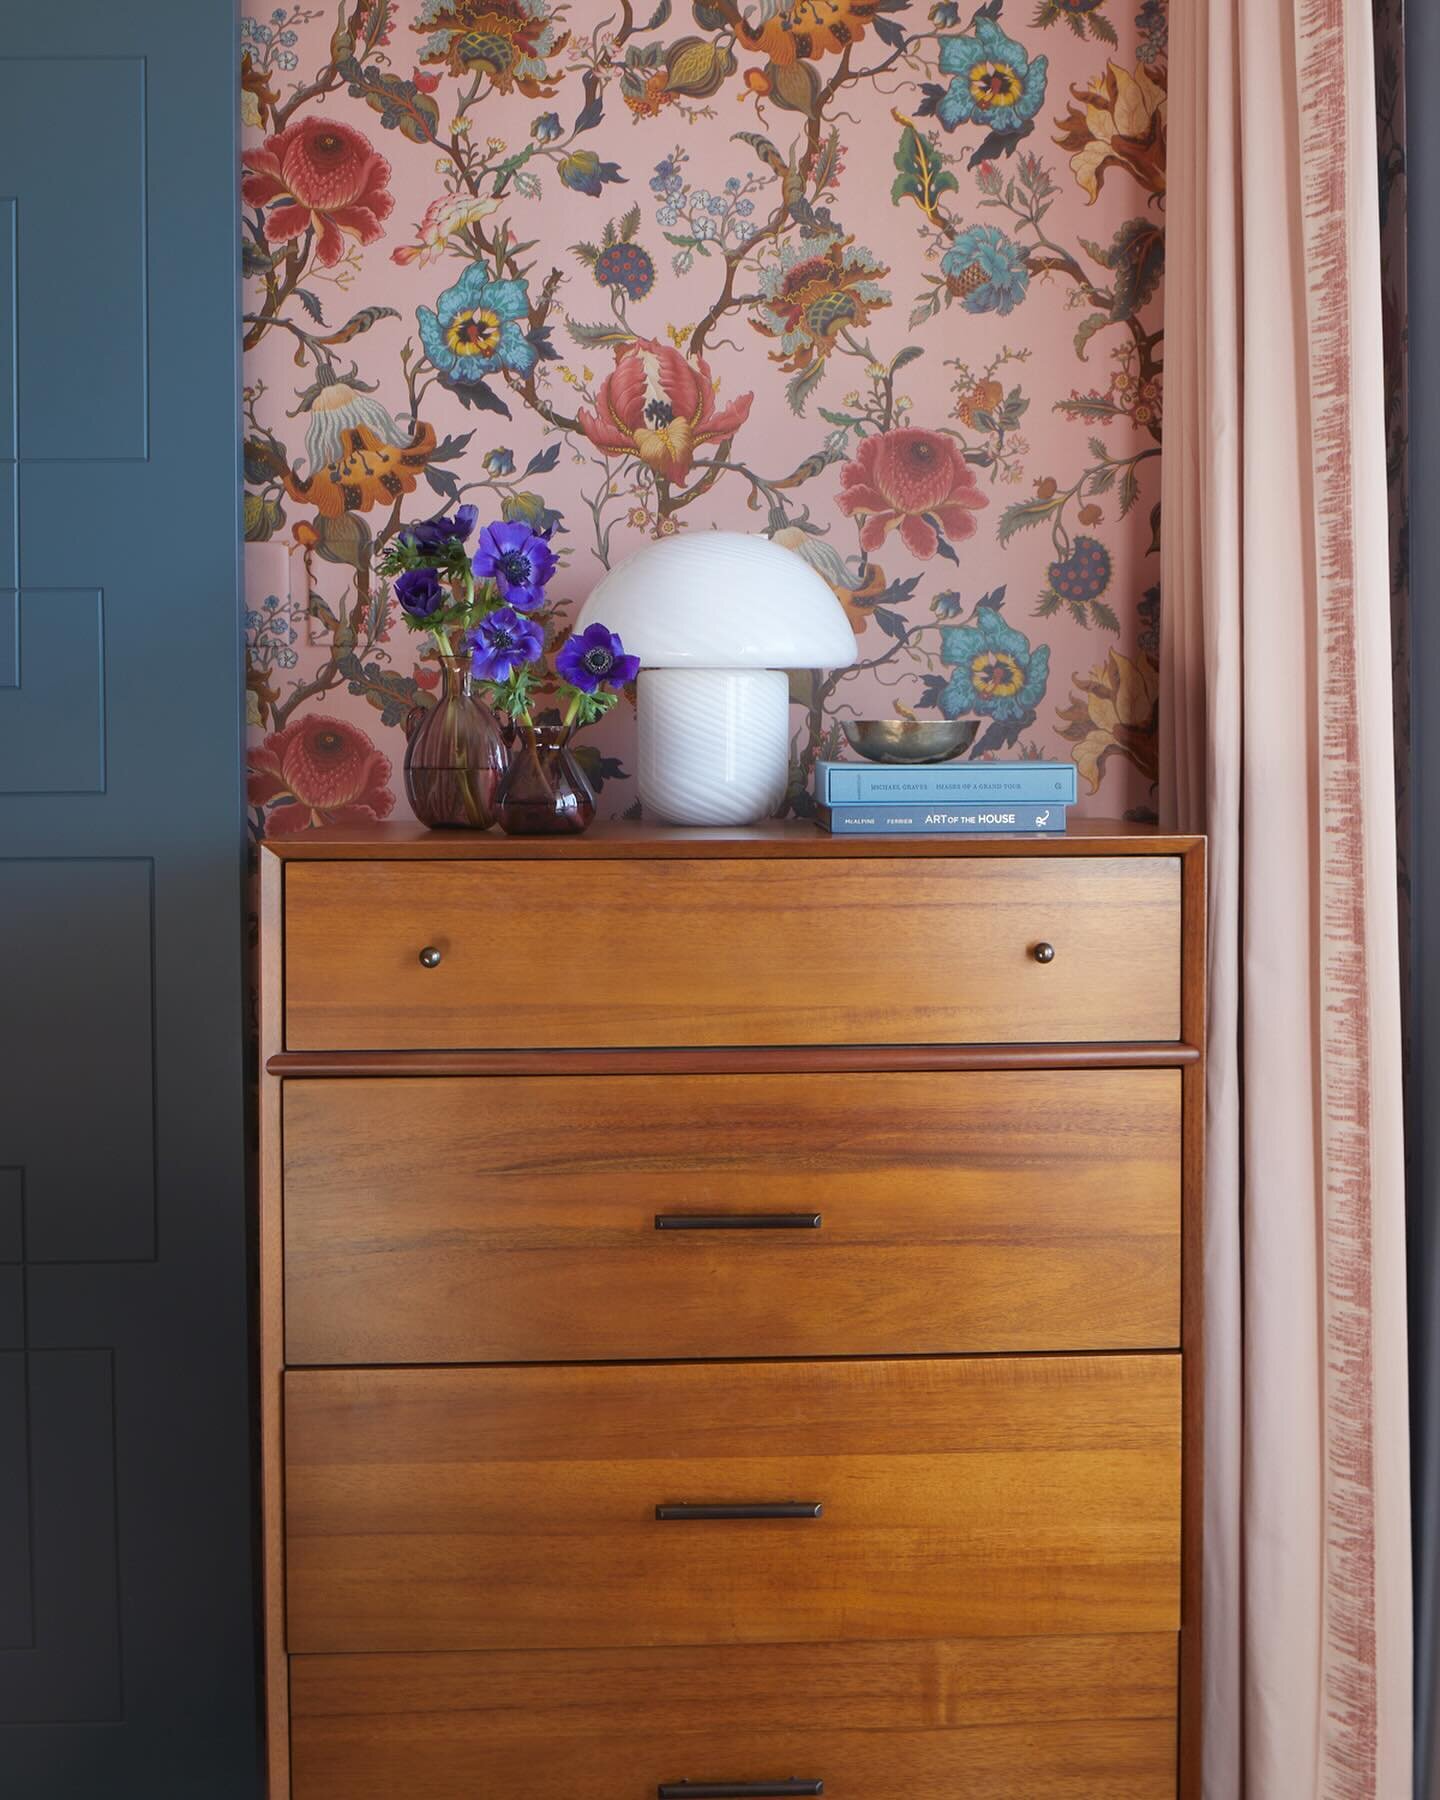 I will always love this romantic yet bold @houseofhackney wallpaper that we used at our Manderley project 💞
Swipe to see the &ldquo;before&rdquo; and how adding colour and pattern can make all the difference. 
Happy Wallpaper Wednesday! 🥰
.
.
.
.
.